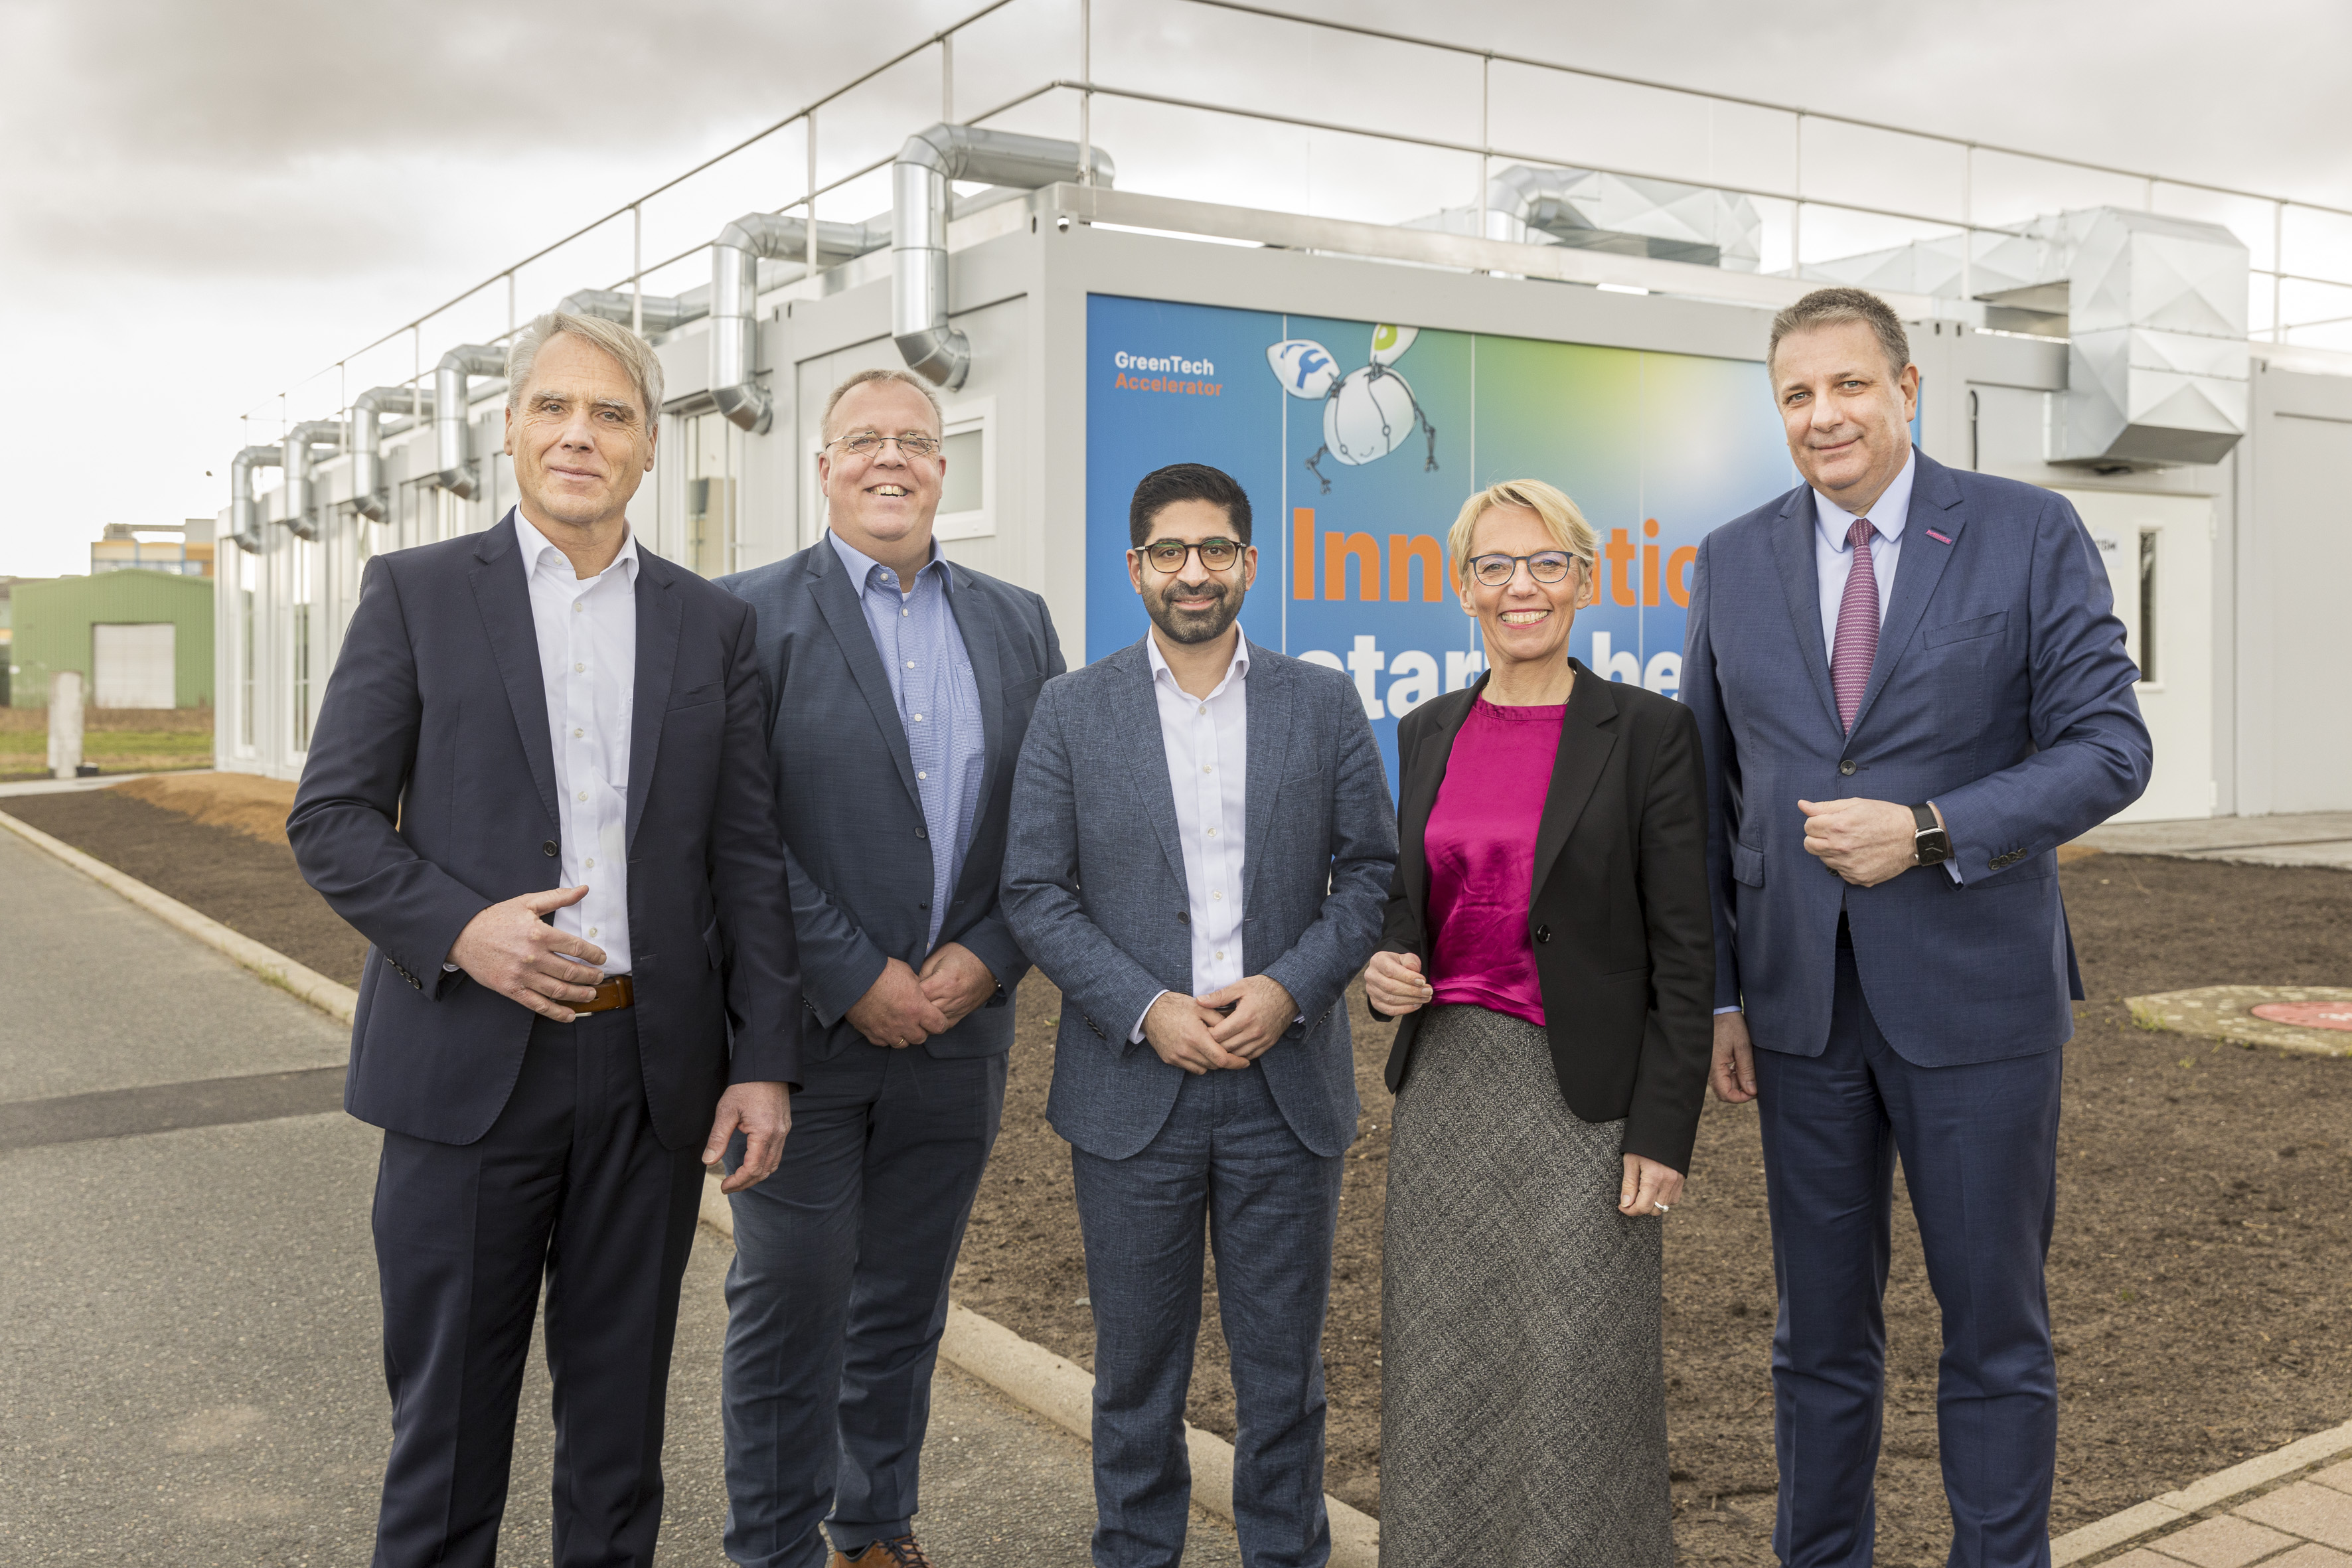 The future is here: new laboratories for GreenTech innovations